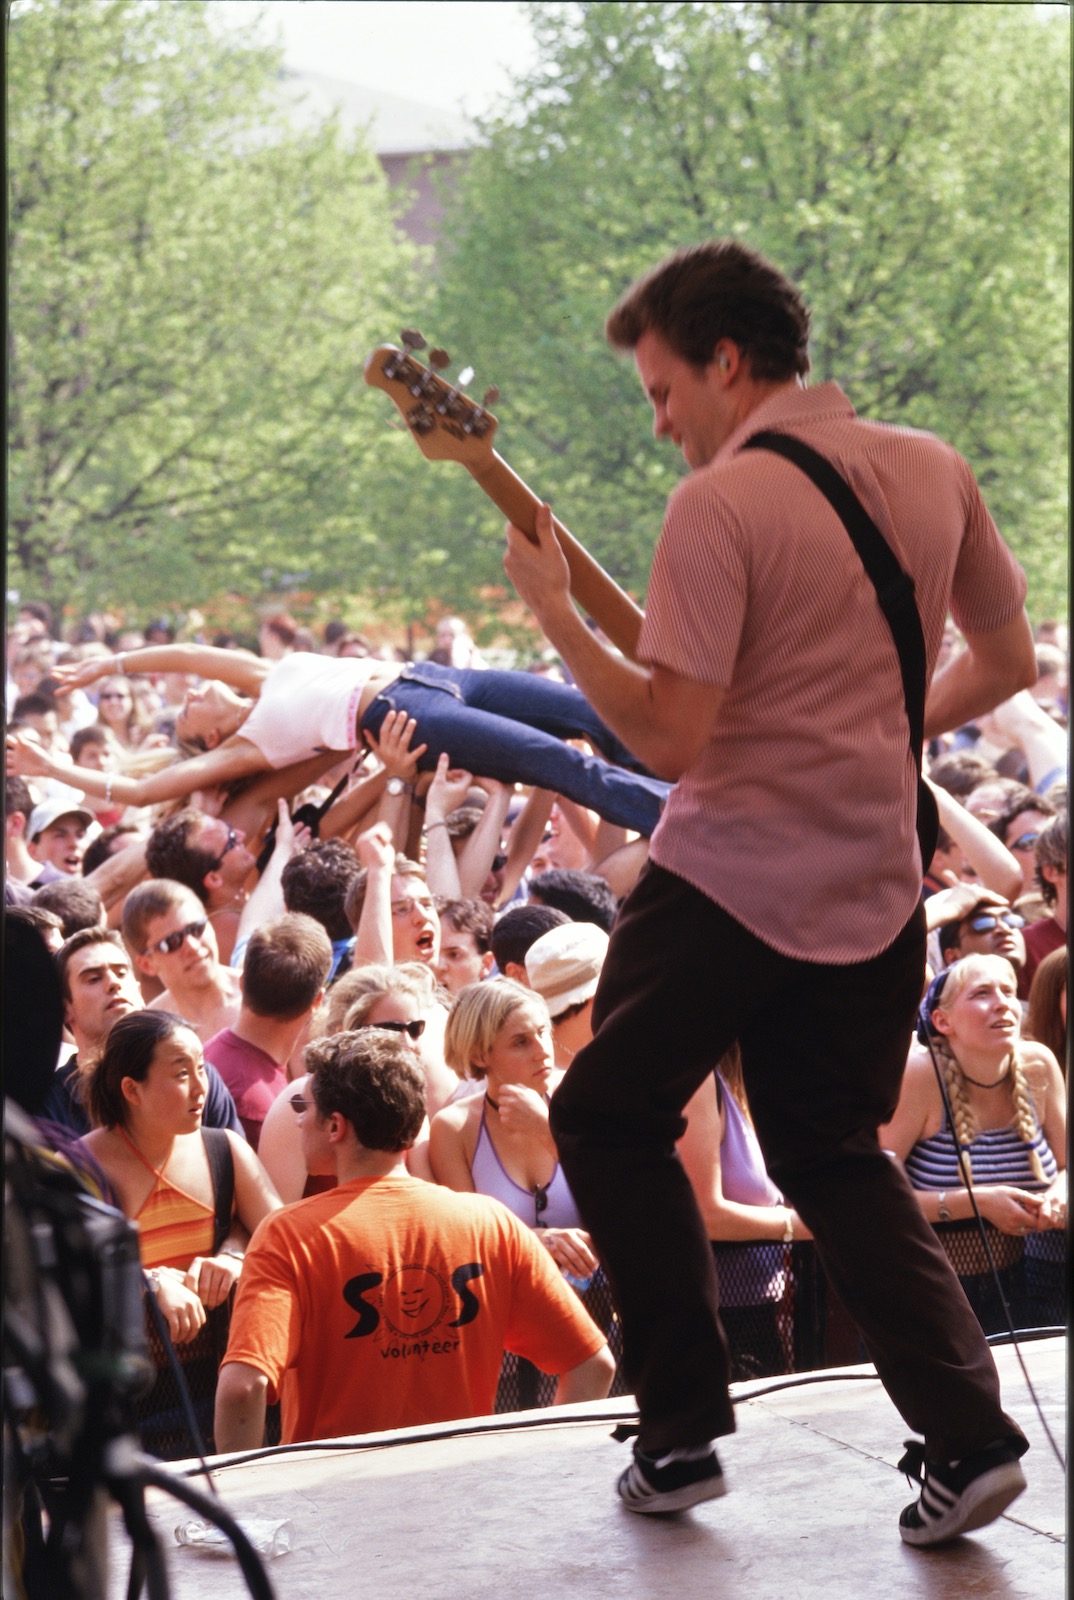 A concert snapshot, early 2000s.